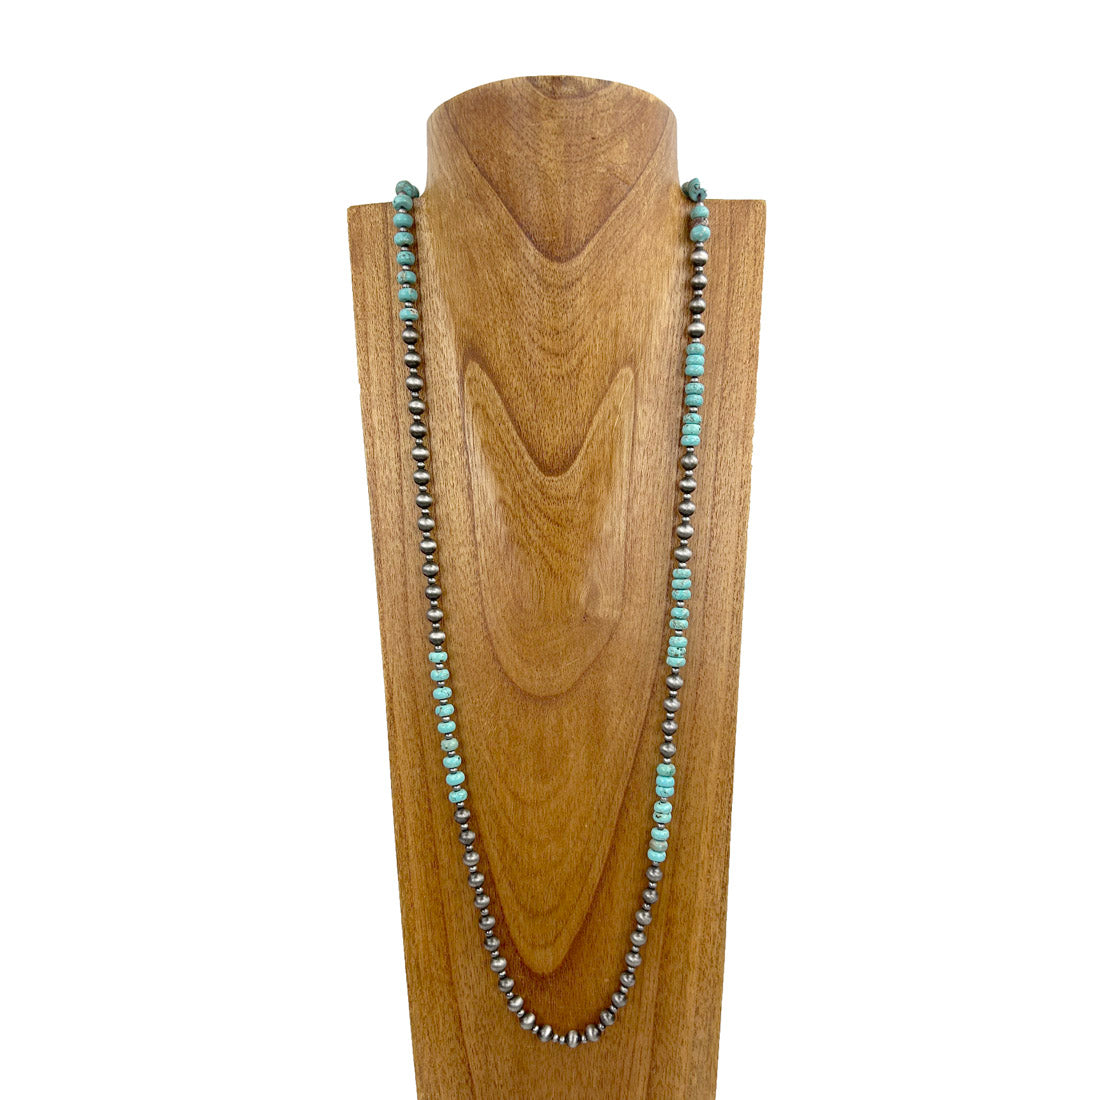 NKZ231014-07             42 inches silver Navajo pearl beads with blue turquoise stone Necklace